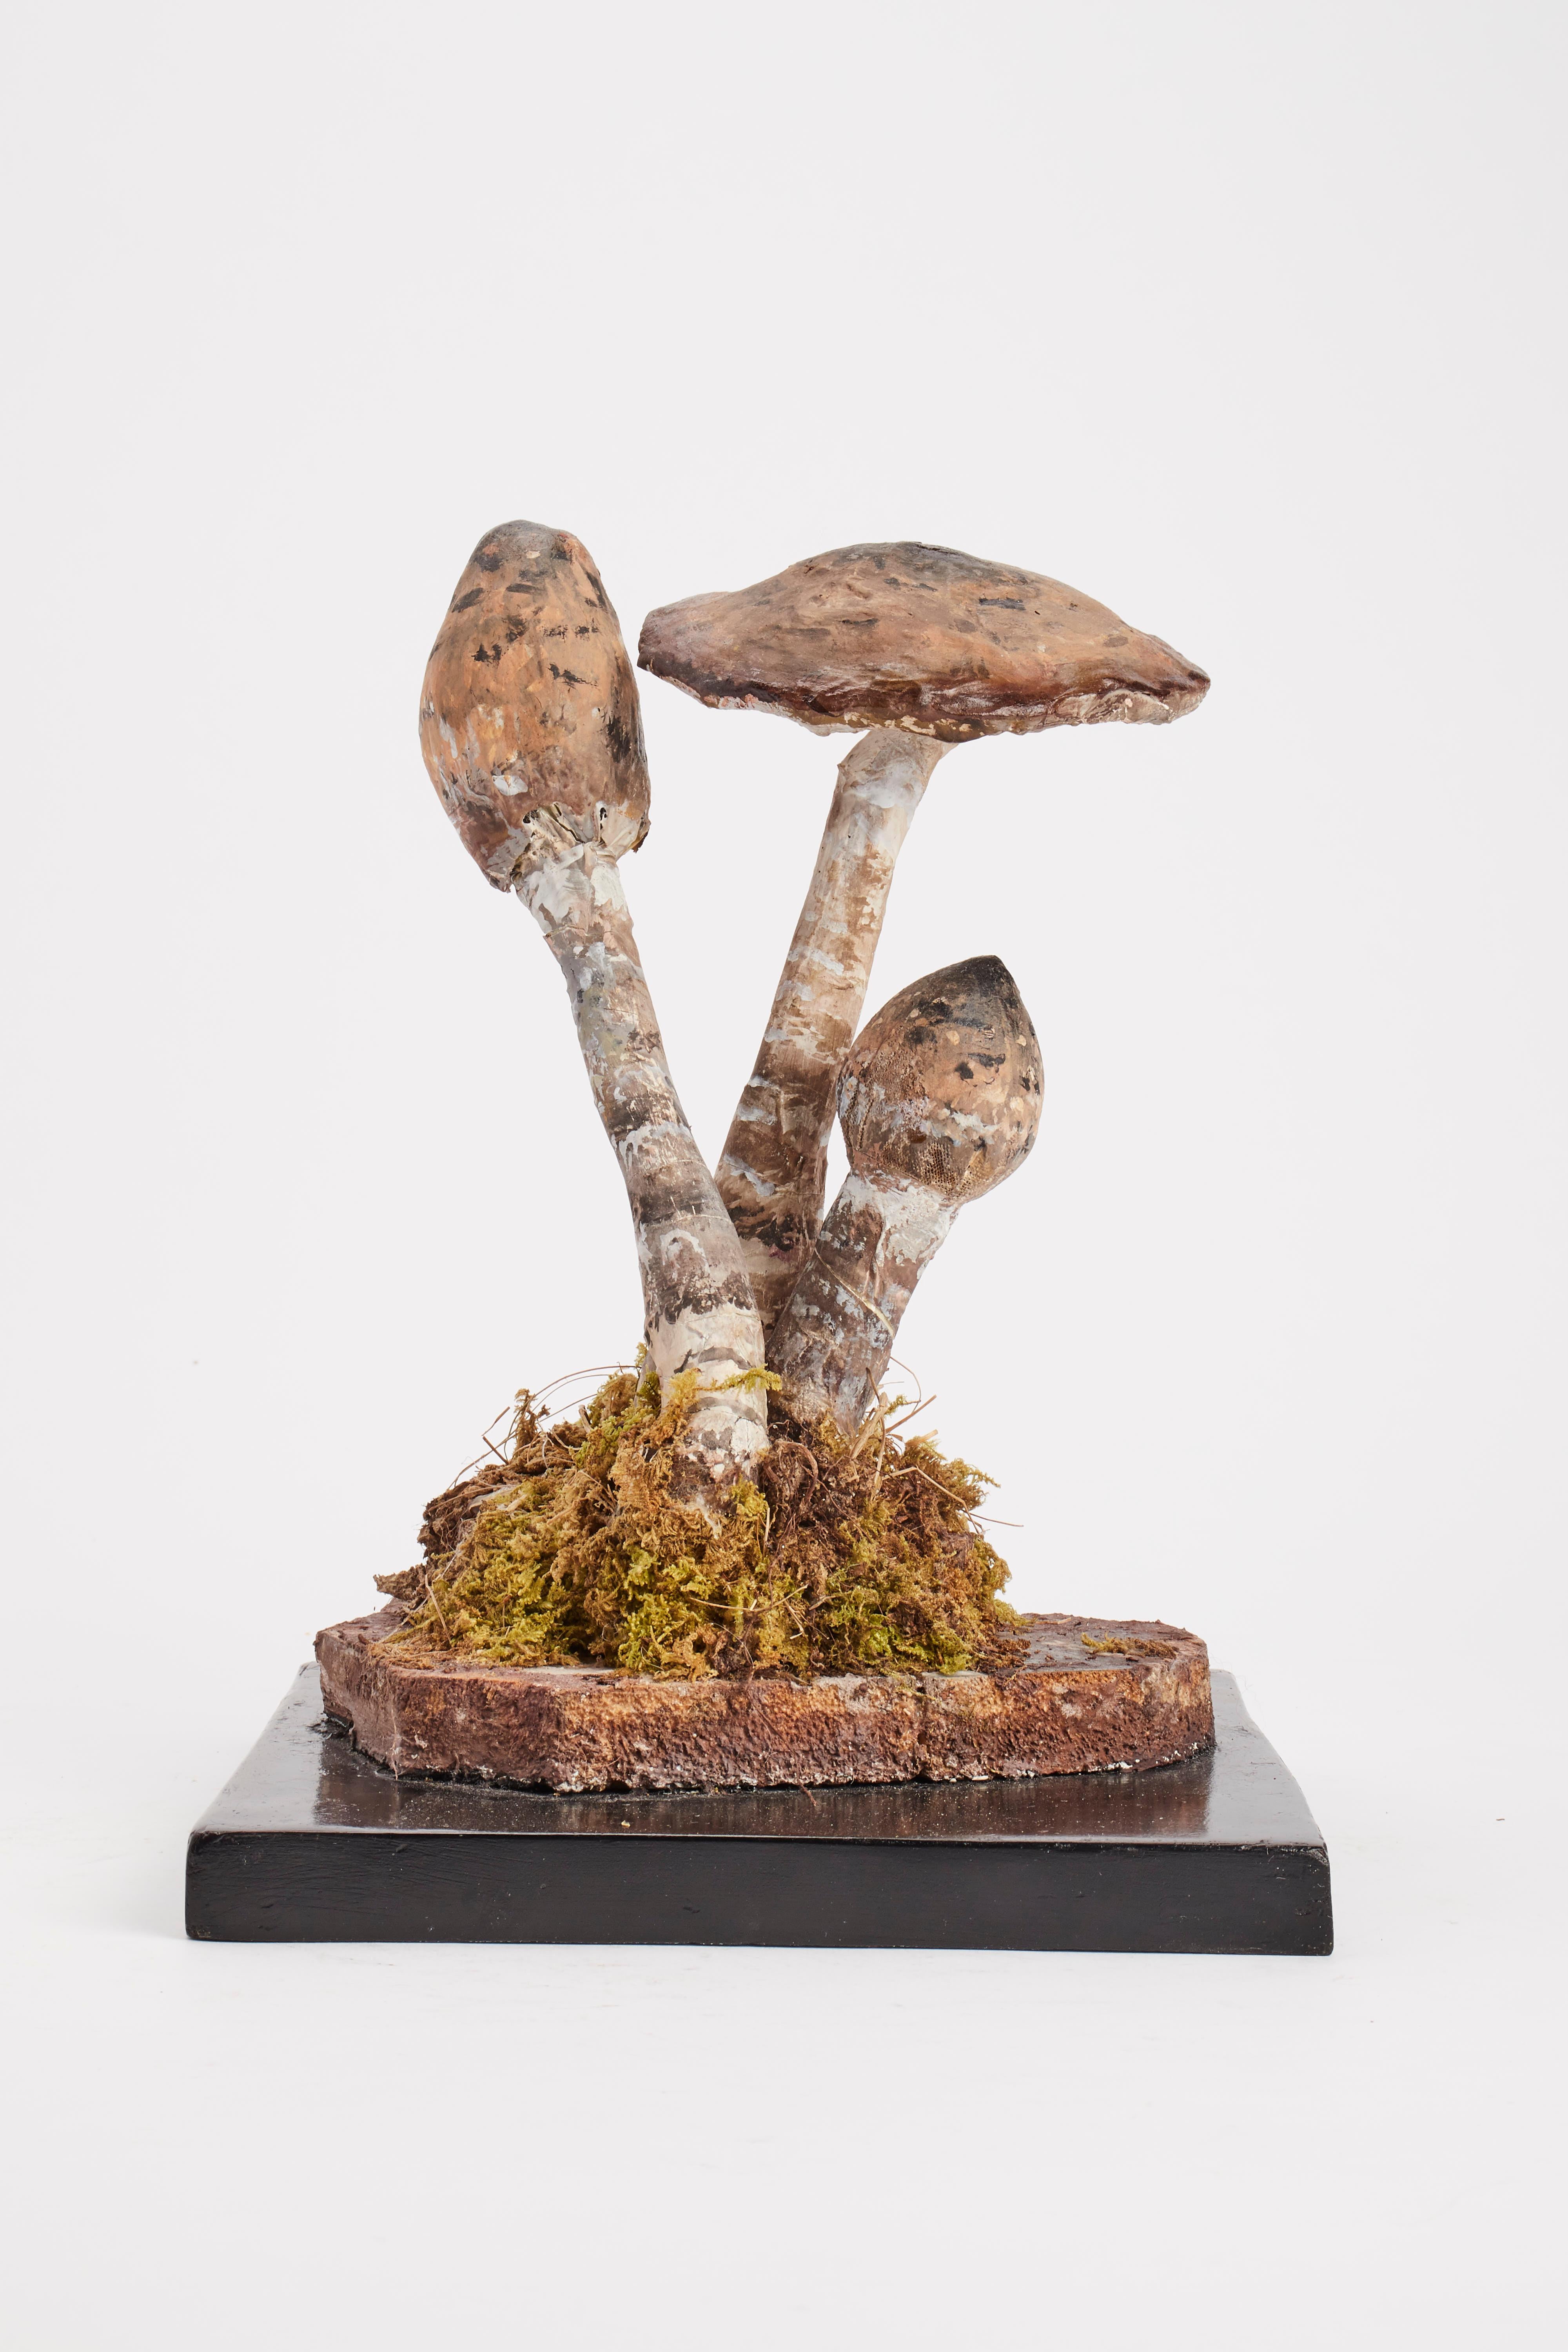 A model for the pharmacy of mushrooms. Specimen Agaricus Campestris, Made out of plaster water colored. Square wooden black base with moss and hay. It shows on the front one label with the scientific name of the specimen handwritten with ink.